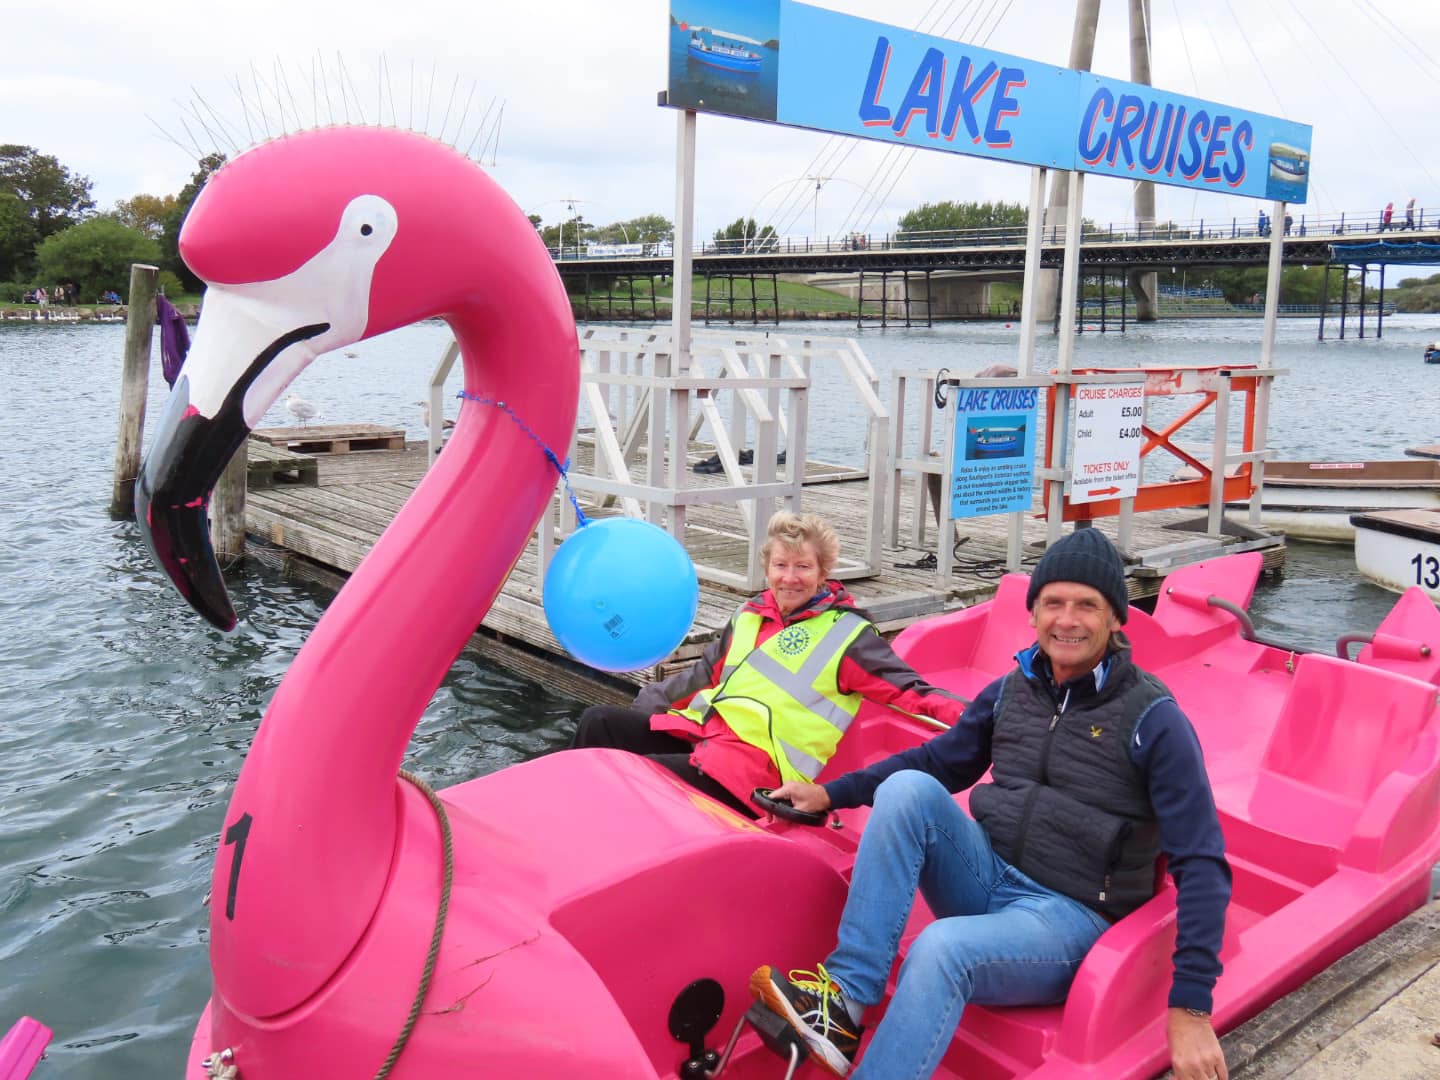 The Rotary Club of Southport staged a Purple Flamingo, Purple for Pedalo race on the Marine Lake in Southport. Photo by Andrew Brown Media